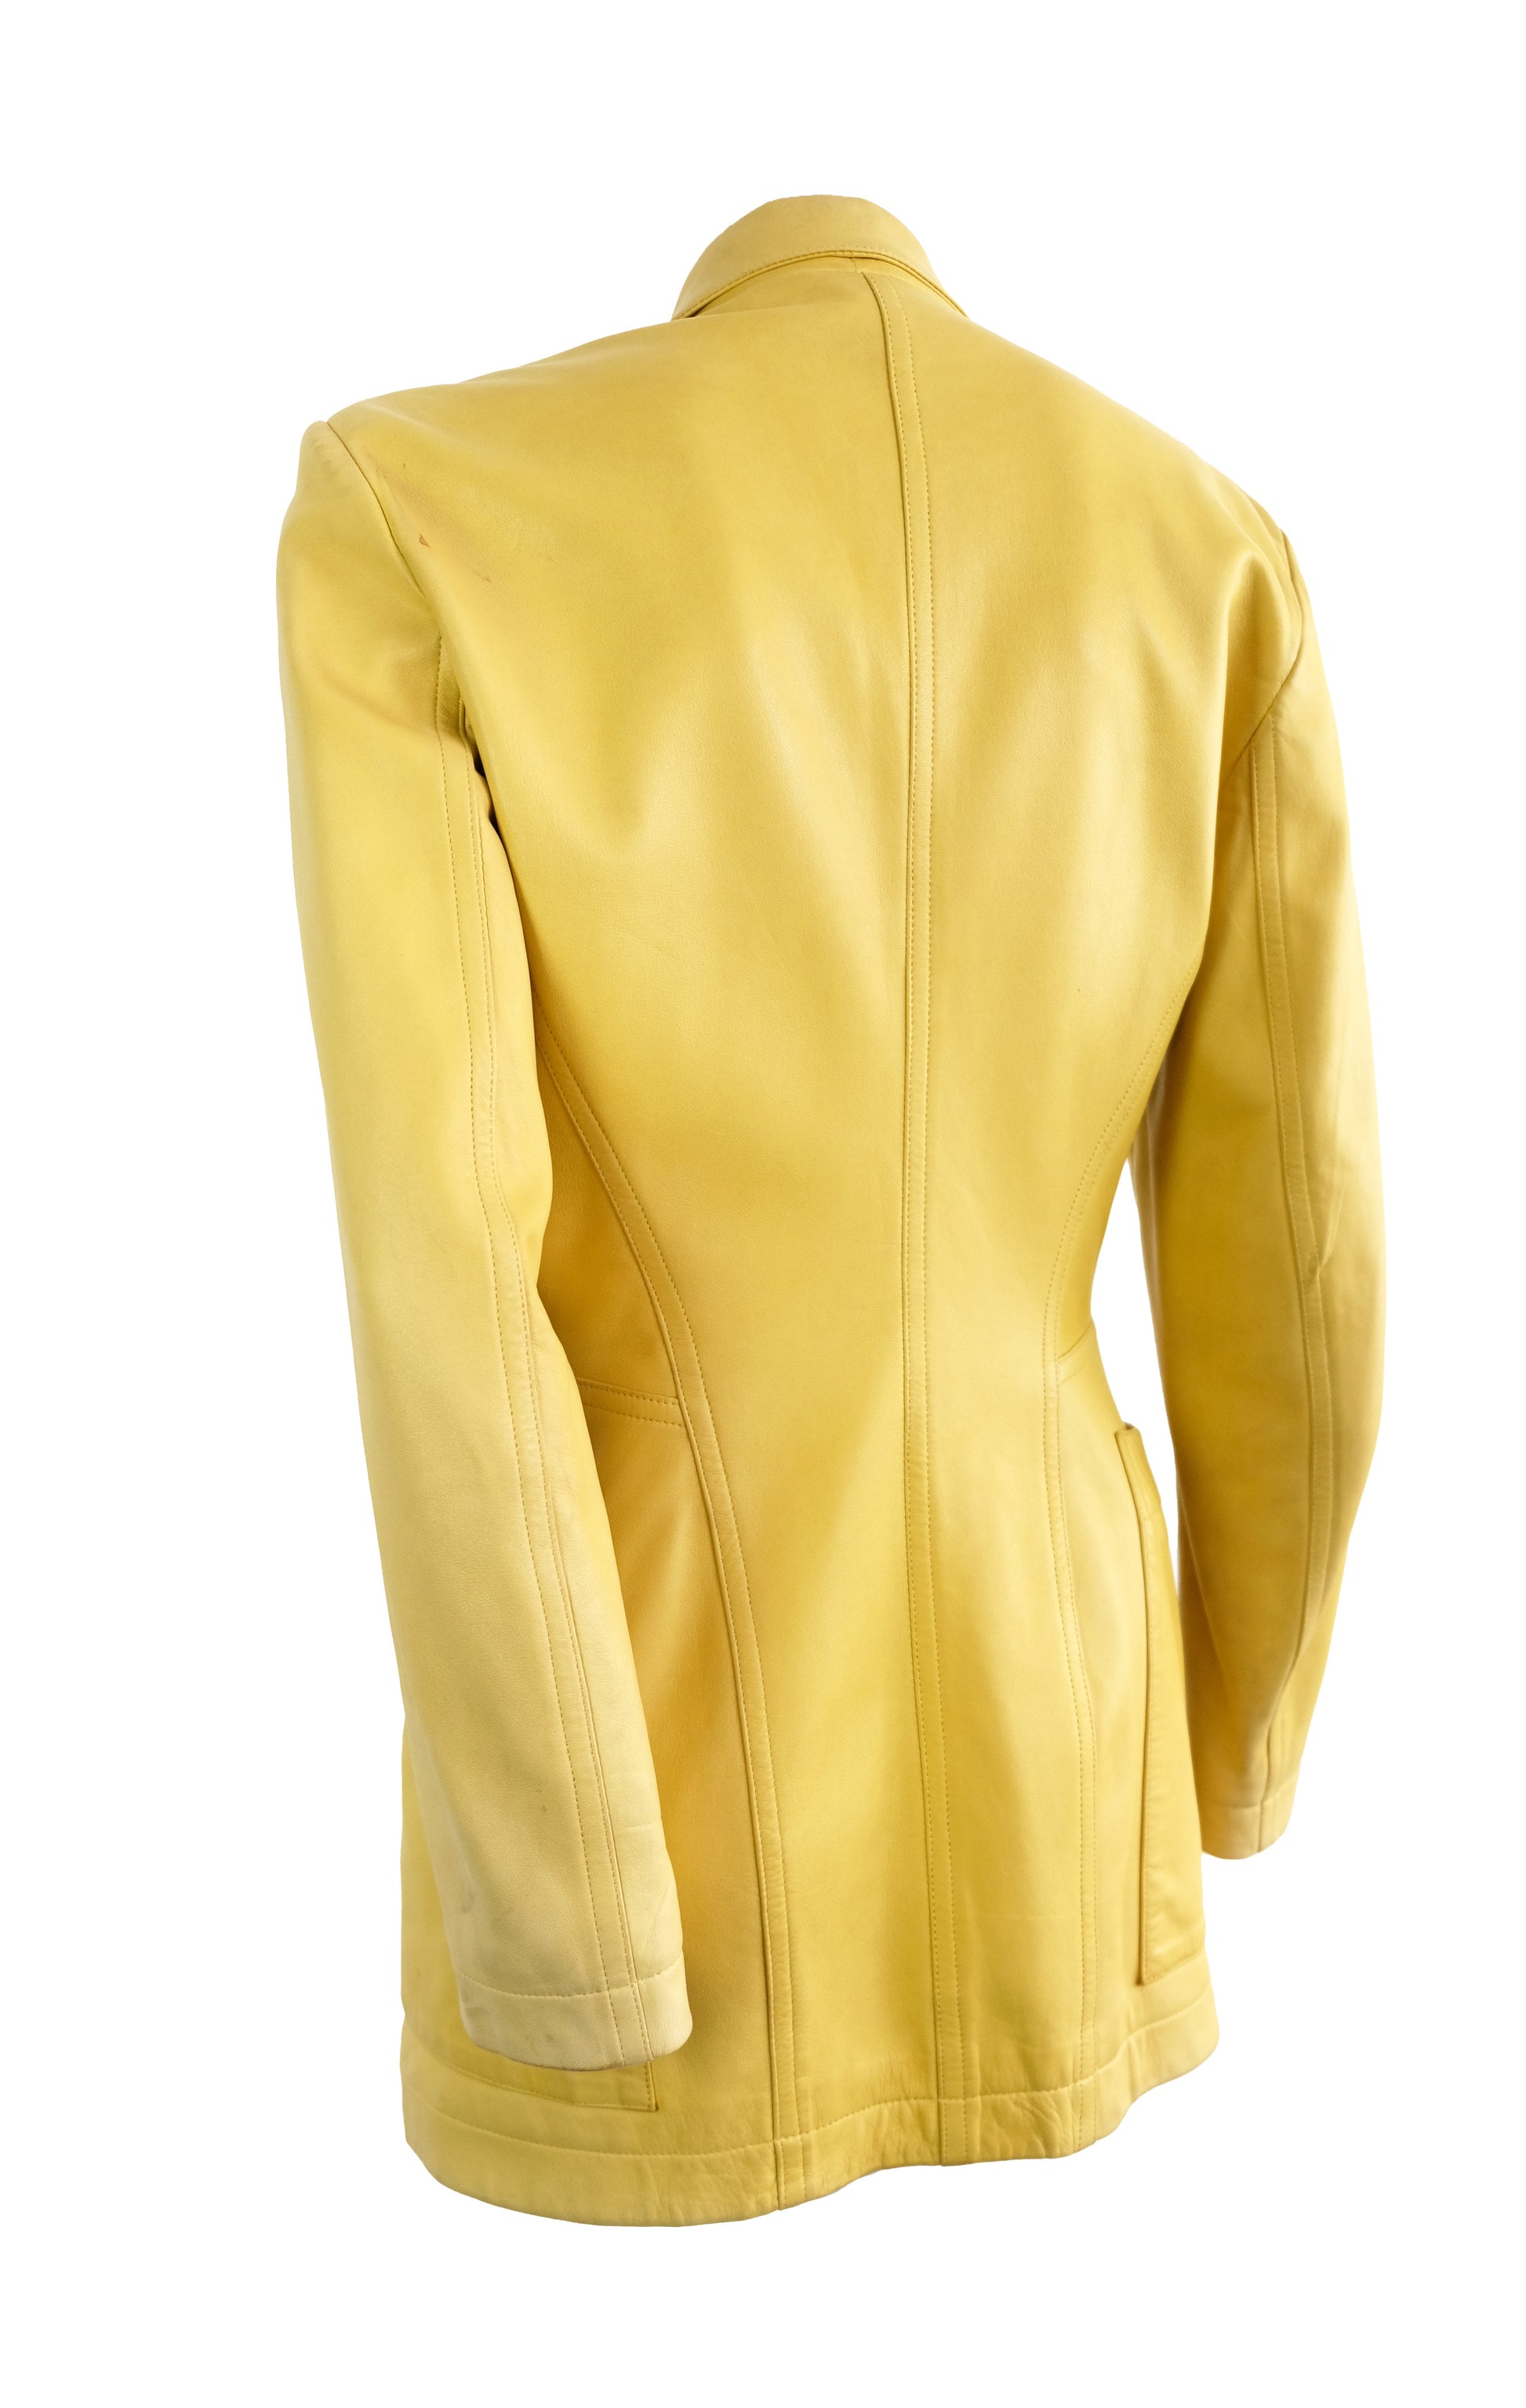 Alaïa Vintage Long Tailored Jacket in Yellow Leather, UK10-12